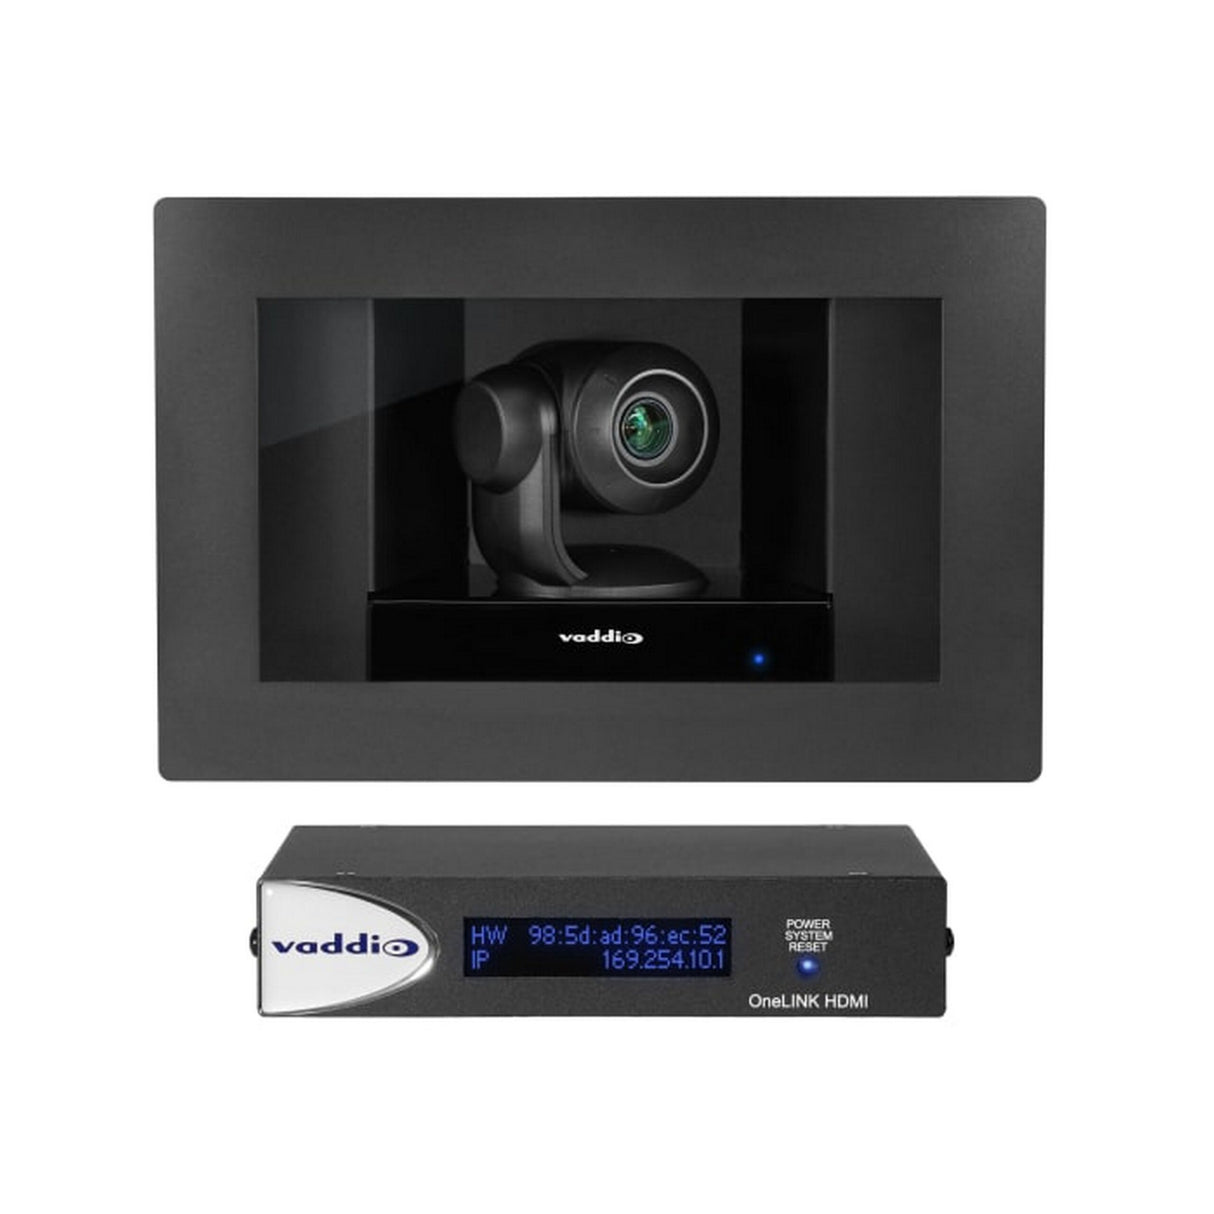 Vaddio RoboSHOT IW Clear Glass OneLINK HDMI PTZ Camera System, Primed